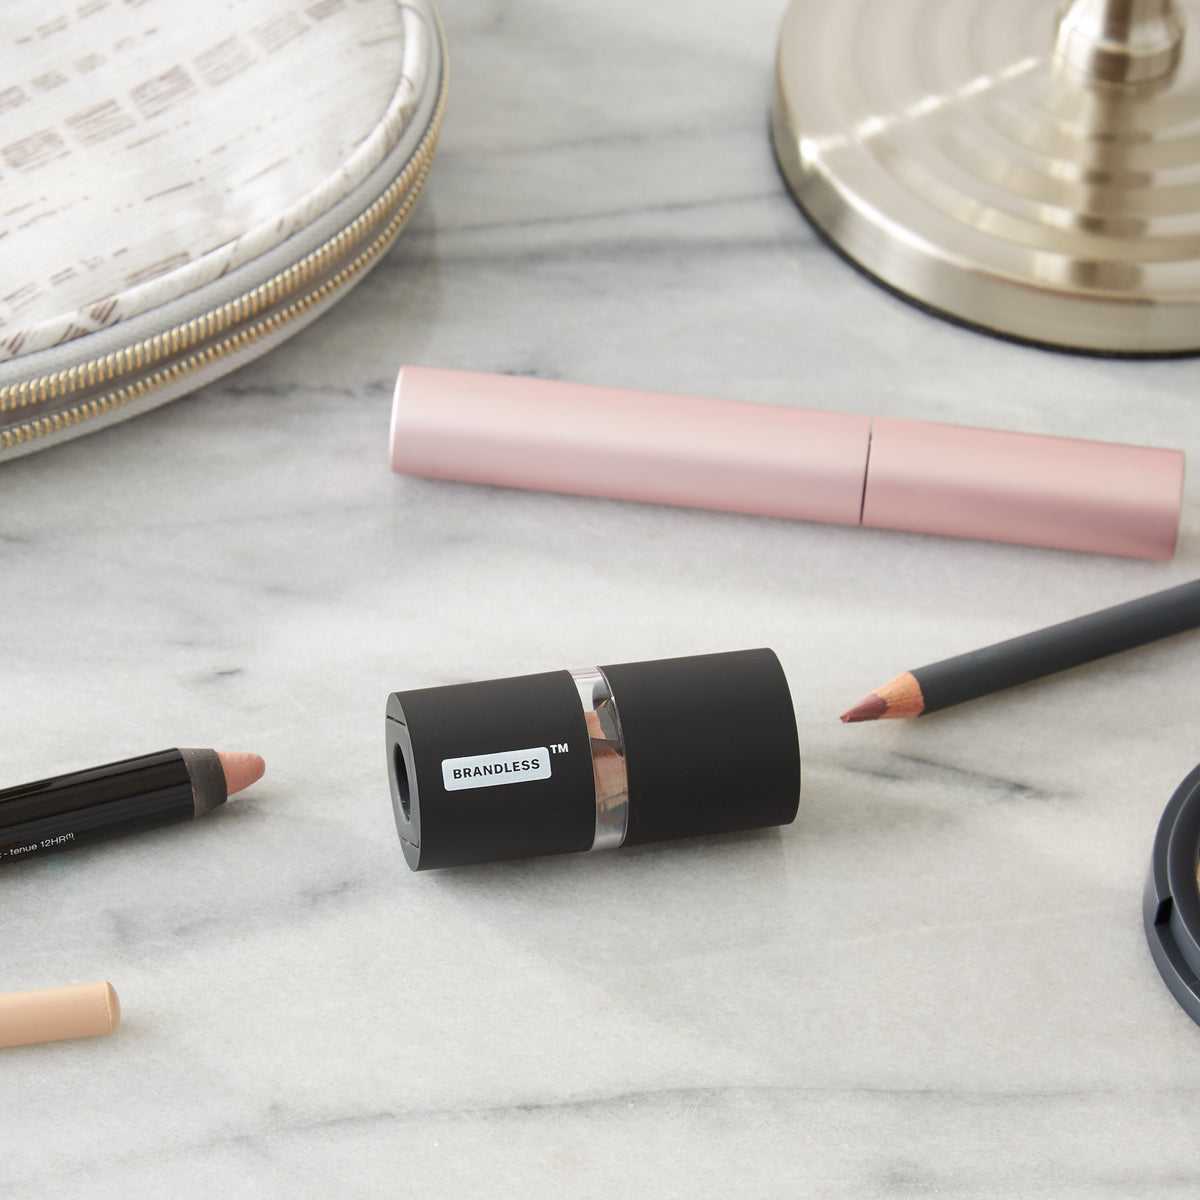 Lifestyle photo, showing the brandless dual sharpener next to various sized beauty pencils that are all compatible, sitting on a bathroom counter.